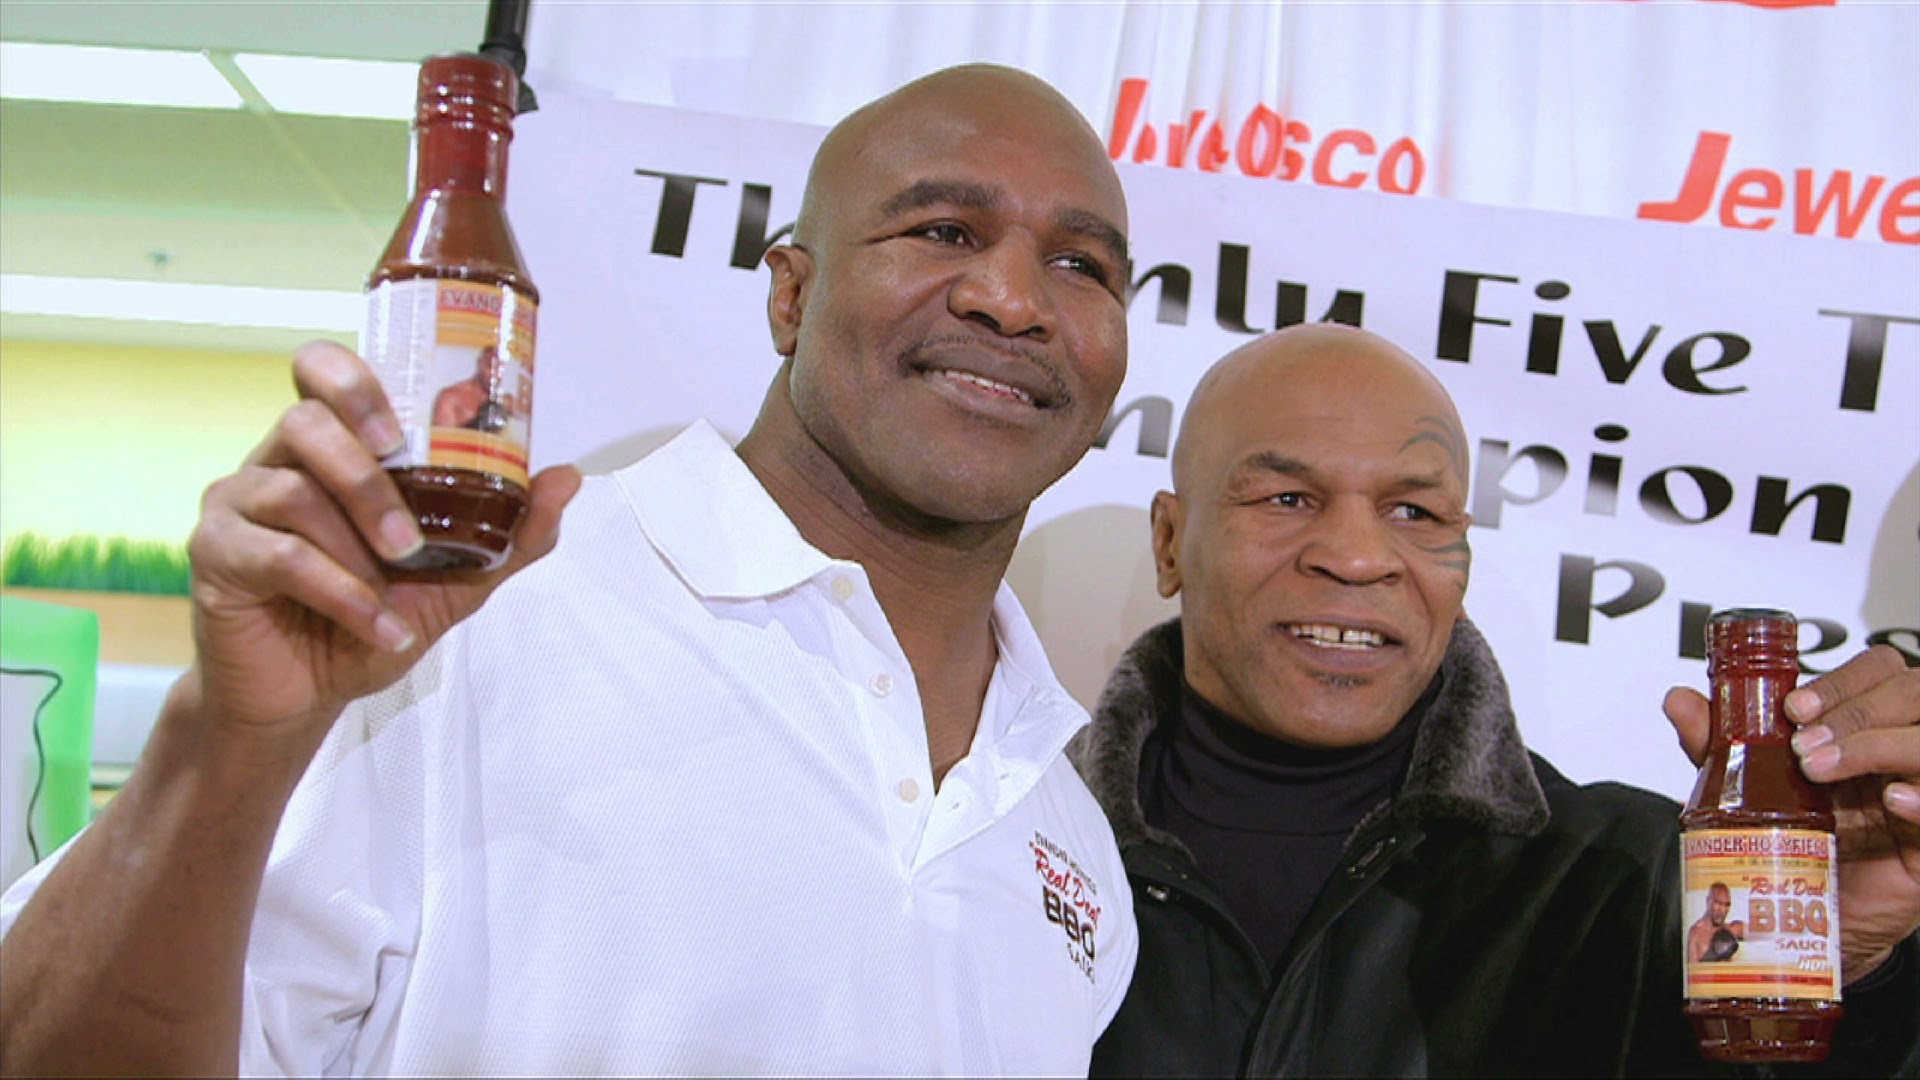 Evander Holyfield, WBC, To Have Welterweight Tourney In 2018 | Fightful Boxing1920 x 1080